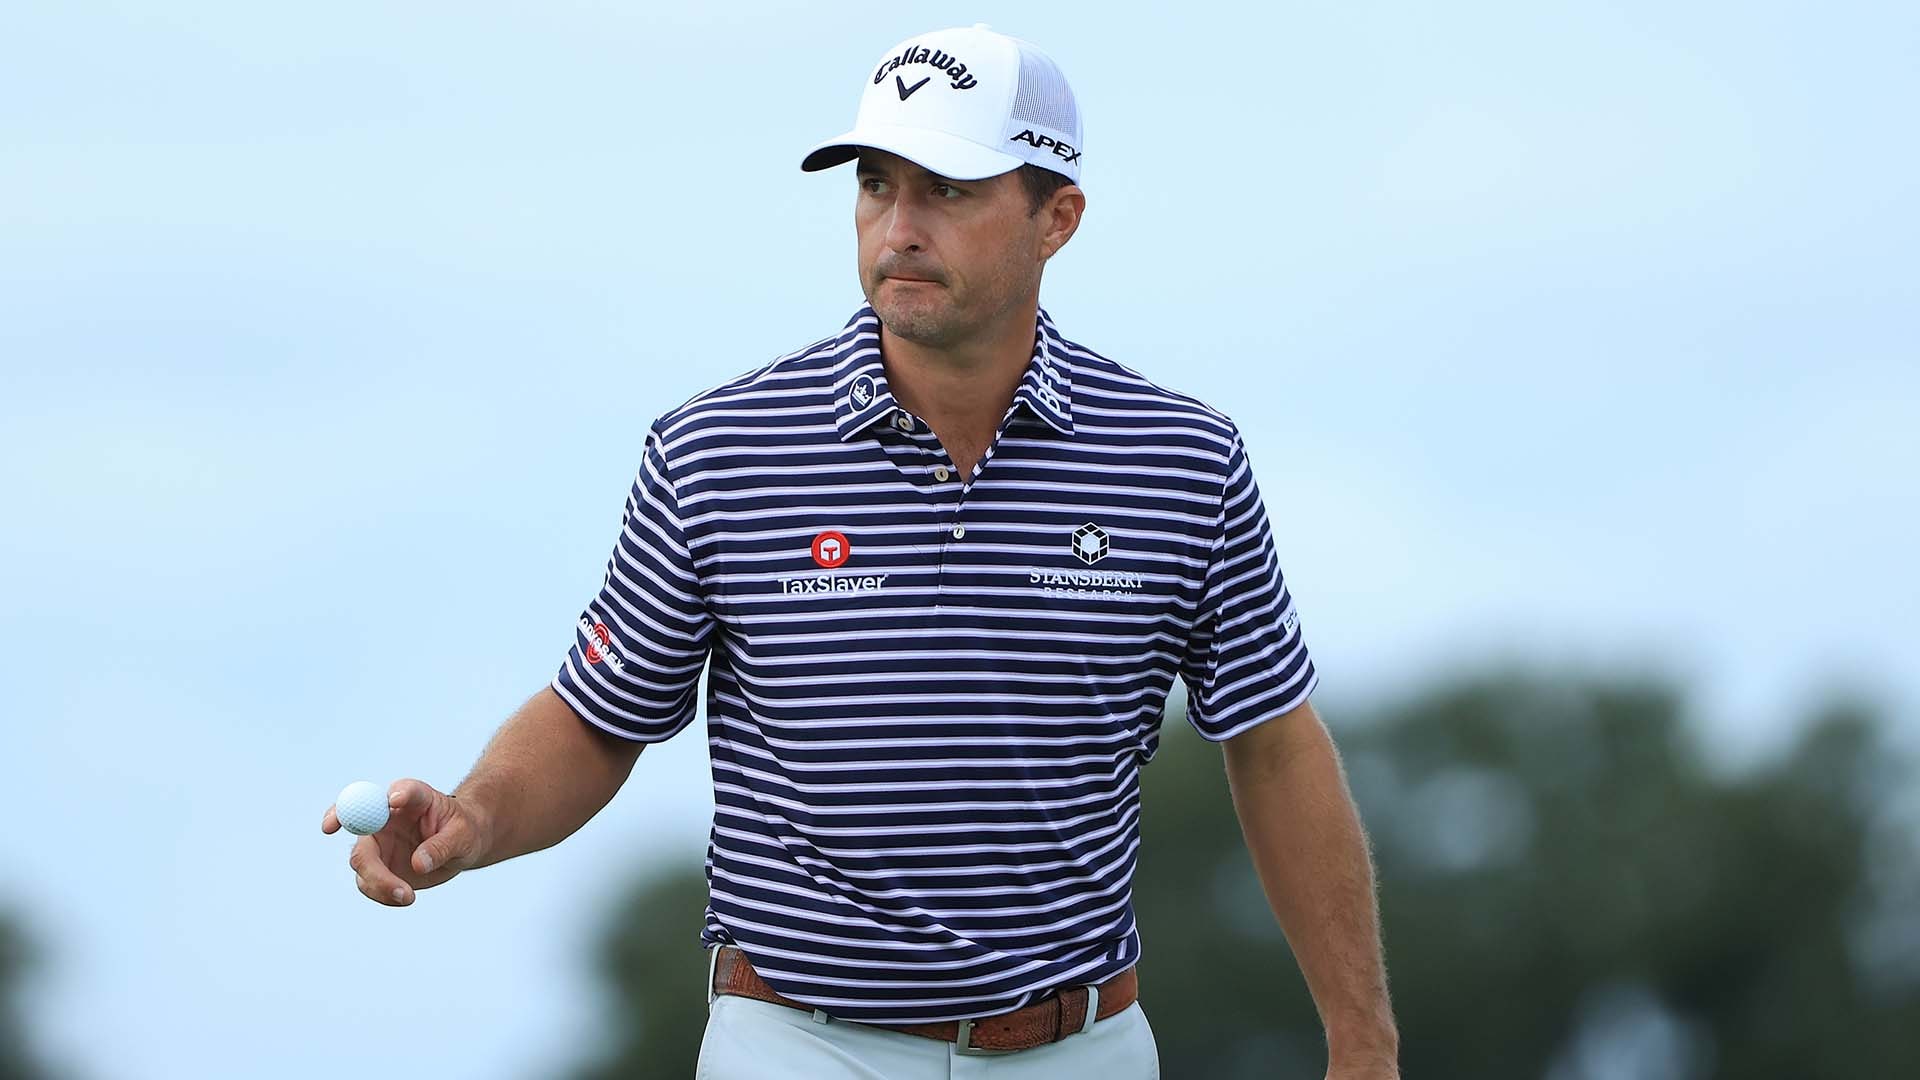 Kevin Kisner goes back to trusty irons, nearly wins RSM Classic